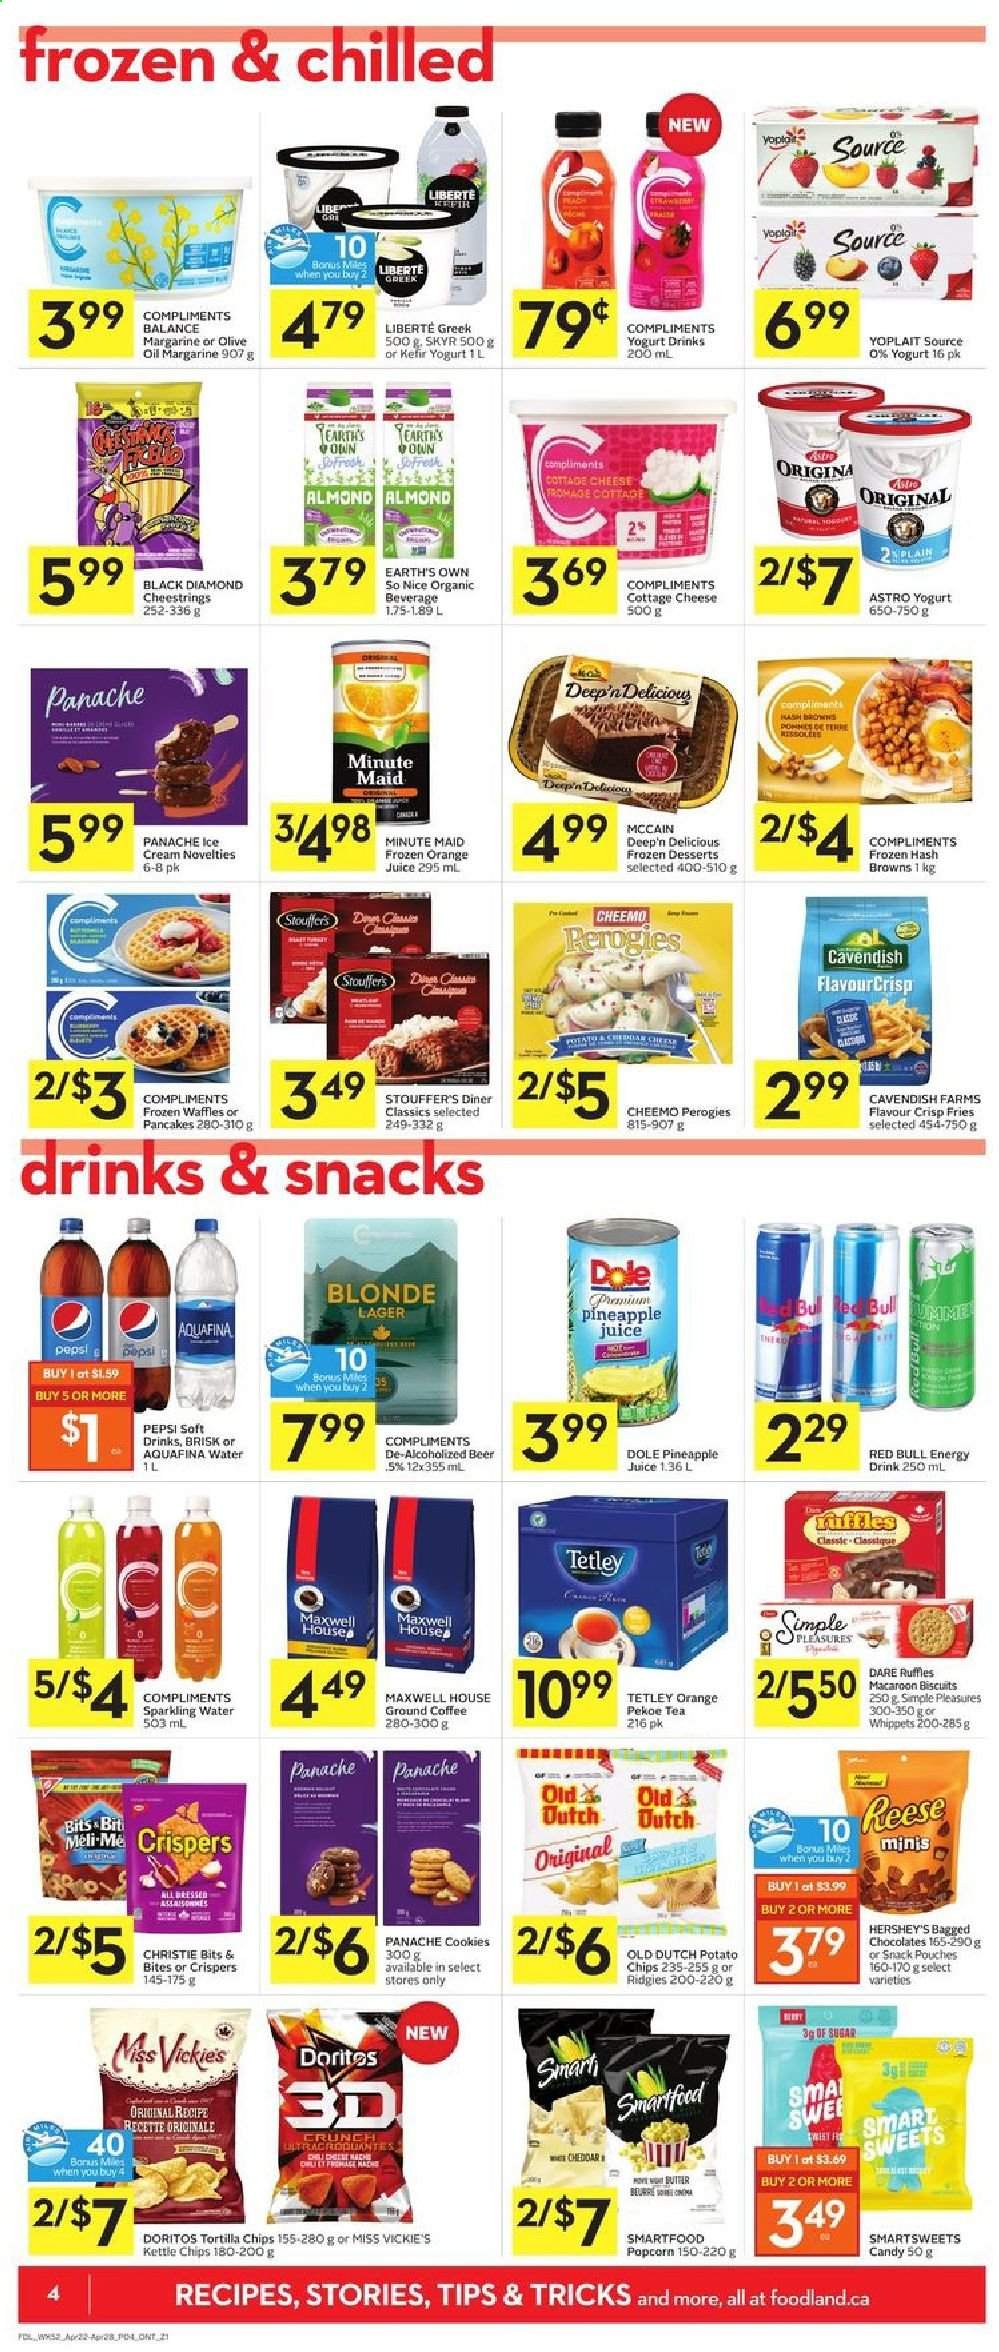 thumbnail - Circulaire Foodland - 22 Avril 2021 - 28 Avril 2021 - Produits soldés - biscuits, cookies, chips, tortilla chips, Pepsi. Page 4.